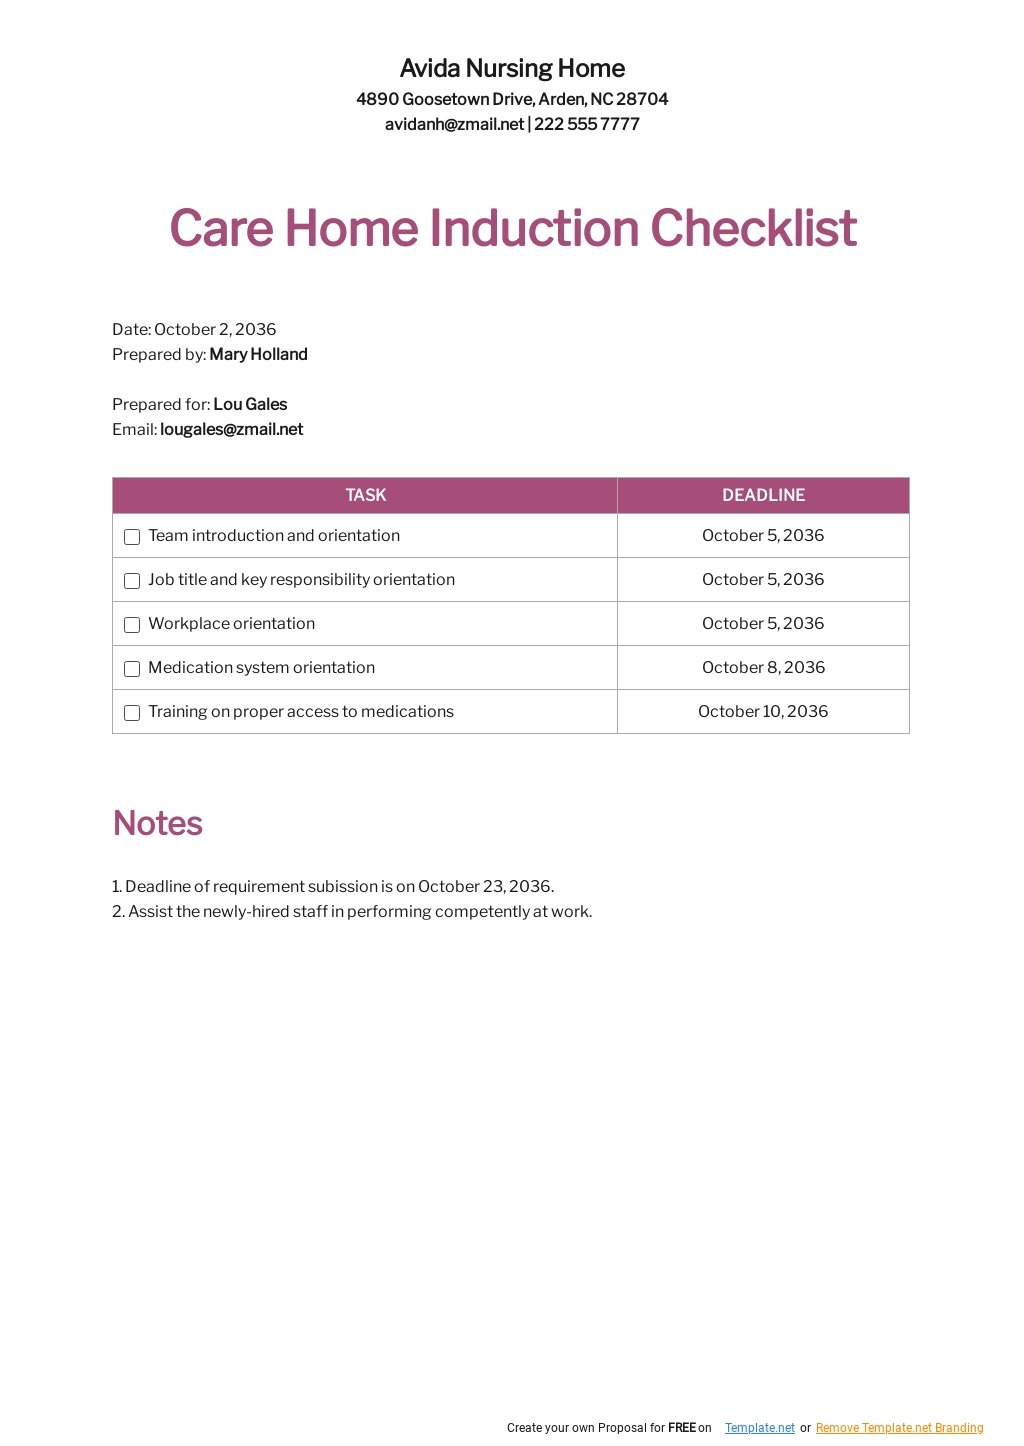 Care Home Induction Checklist Template